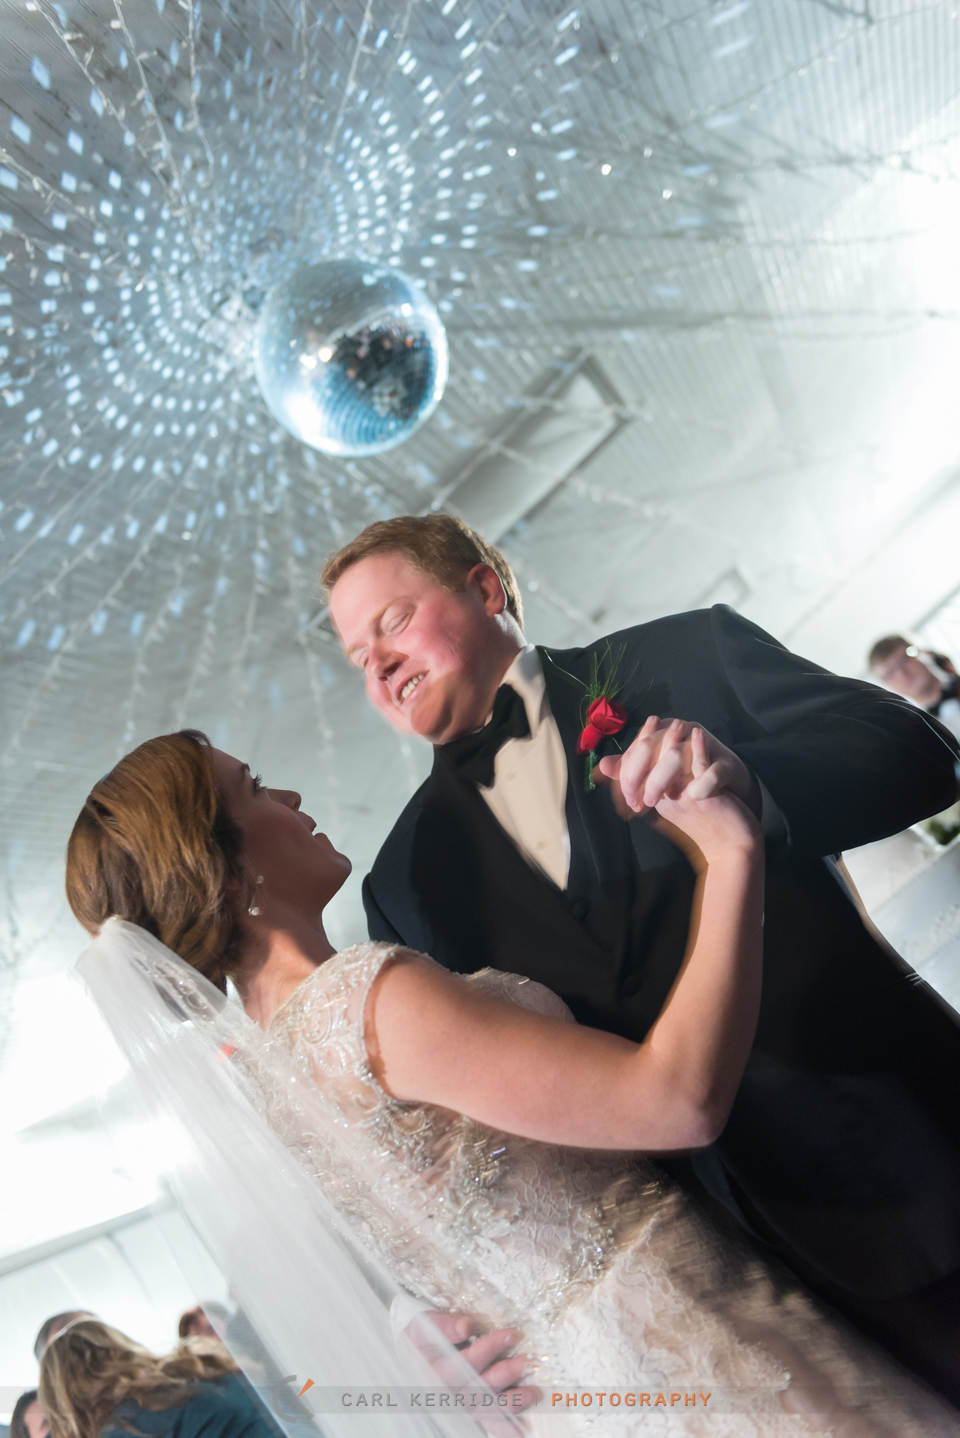 southern bride and her groom dance under a disco light at the wedding reception